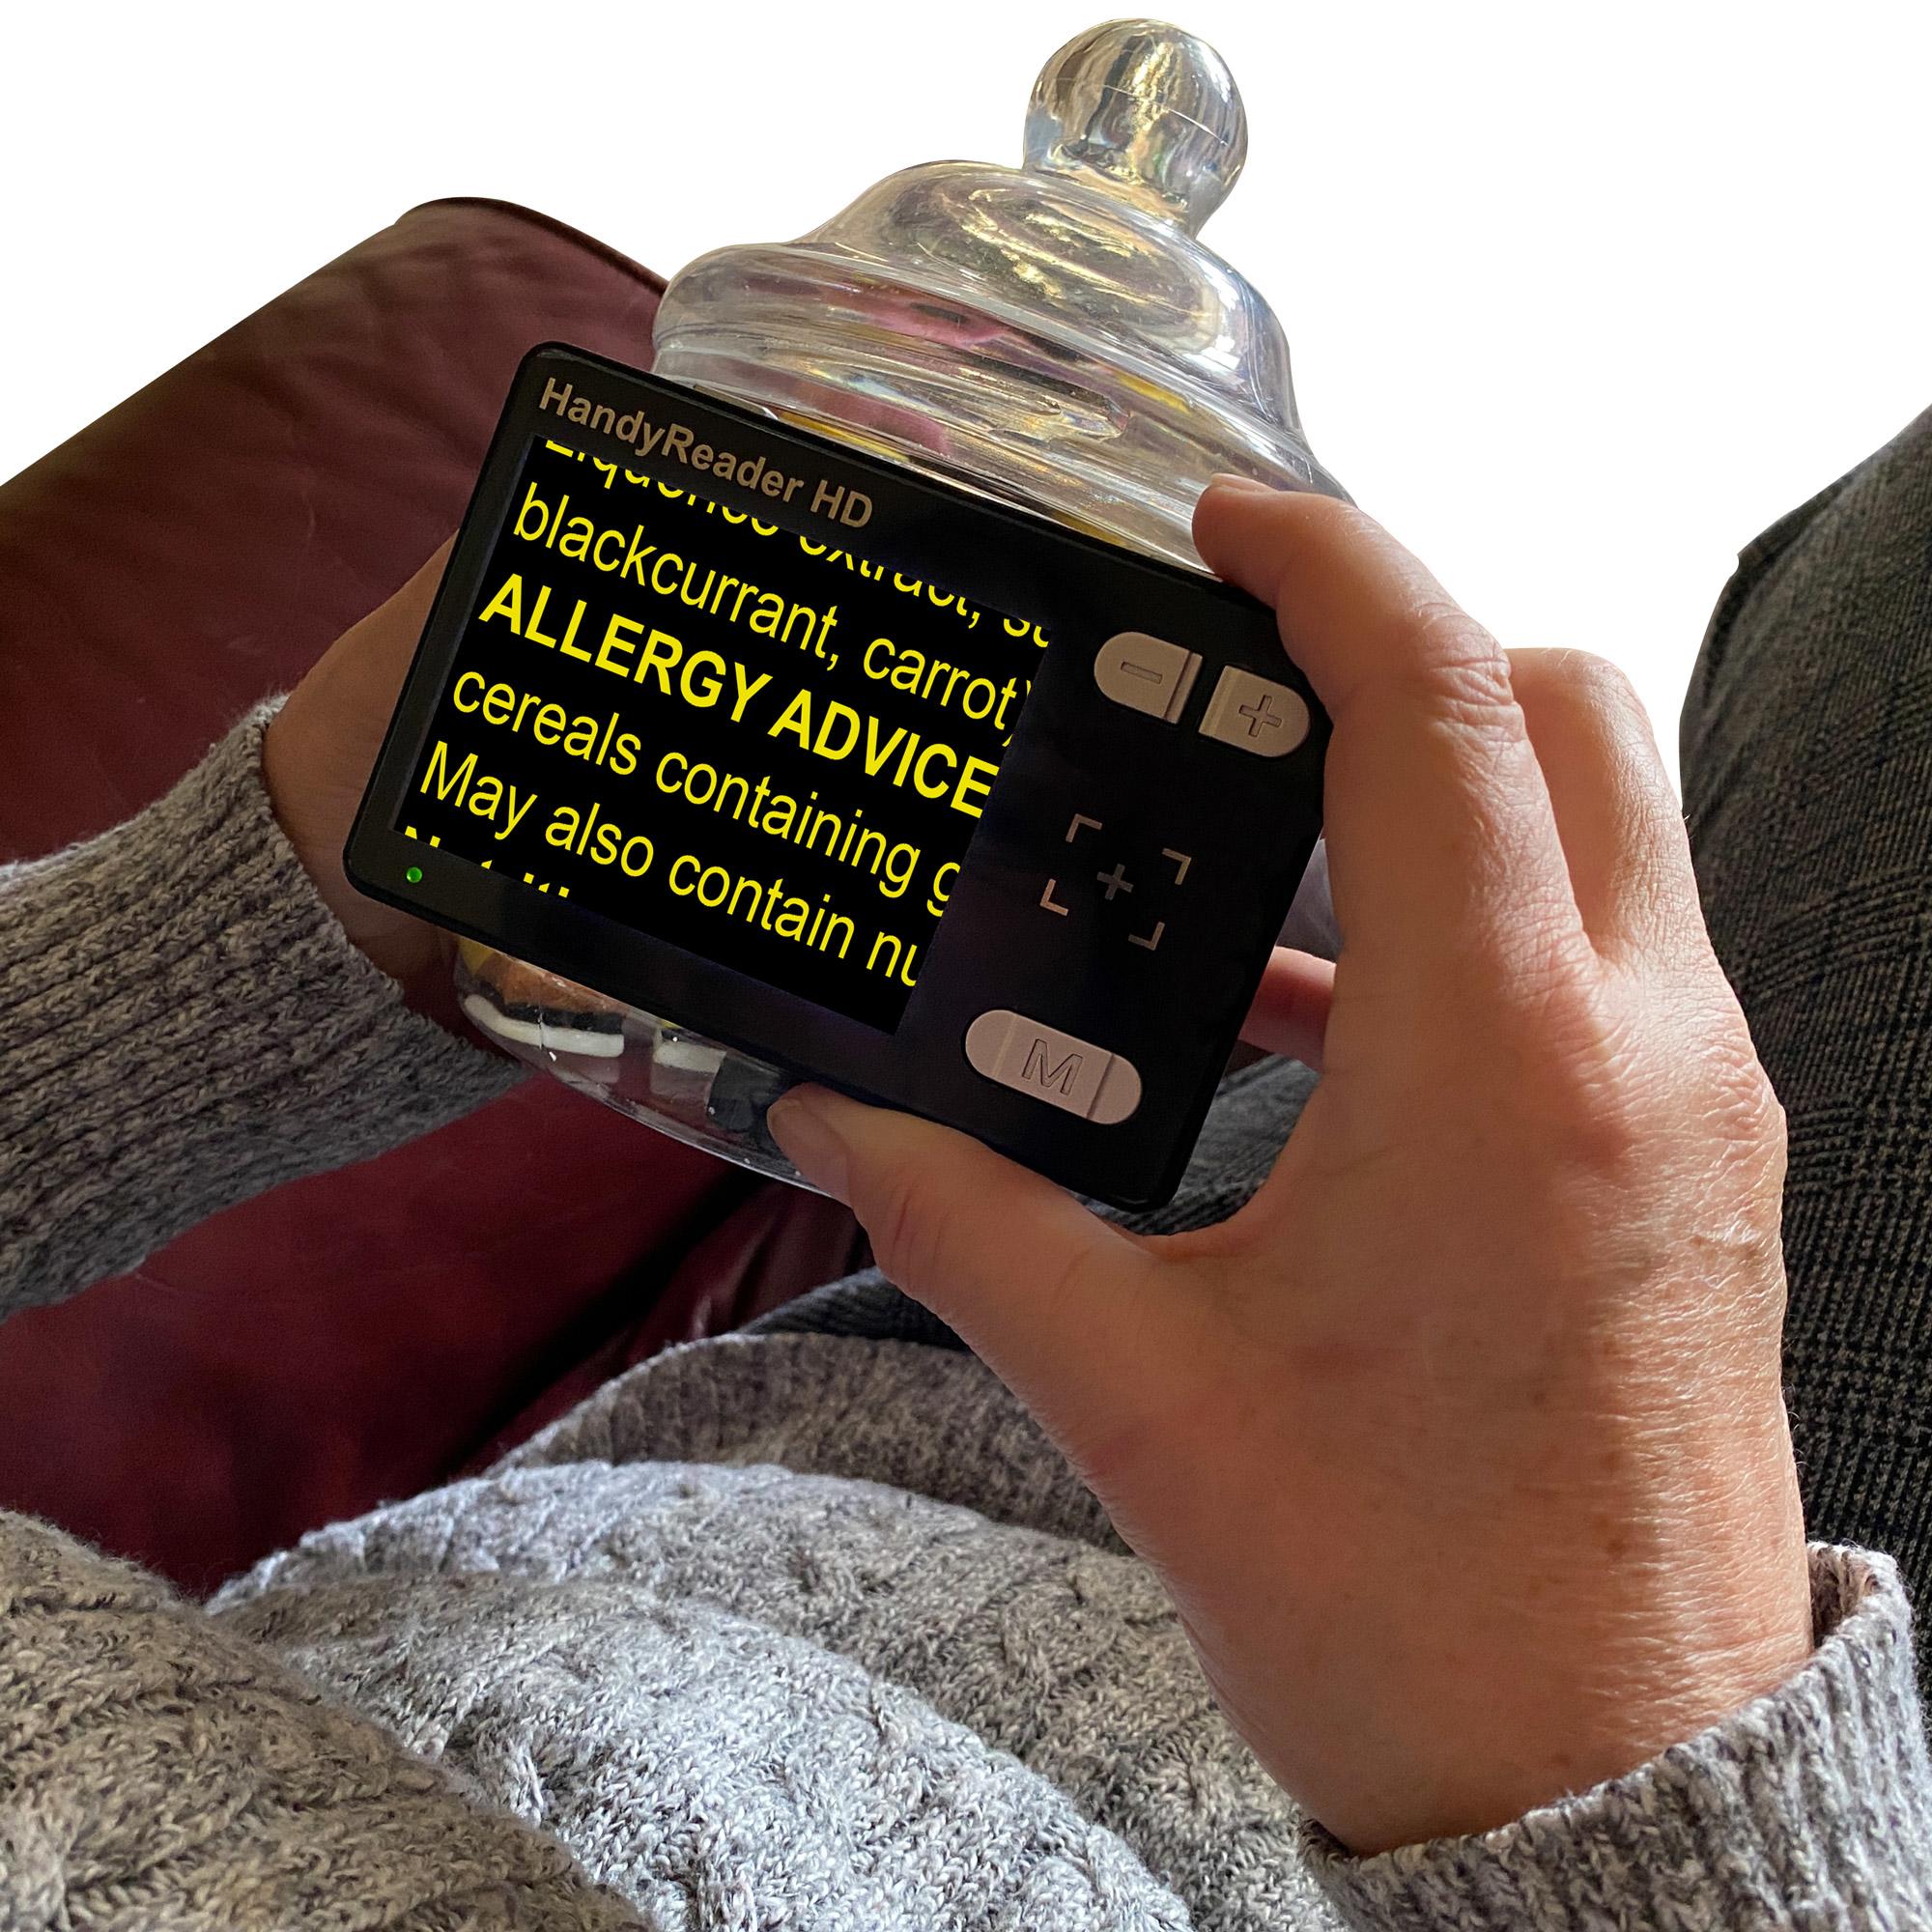 HandyReader HD magnifying the allergy advice on a glass jar of sweets, the text is yellow and the background is black